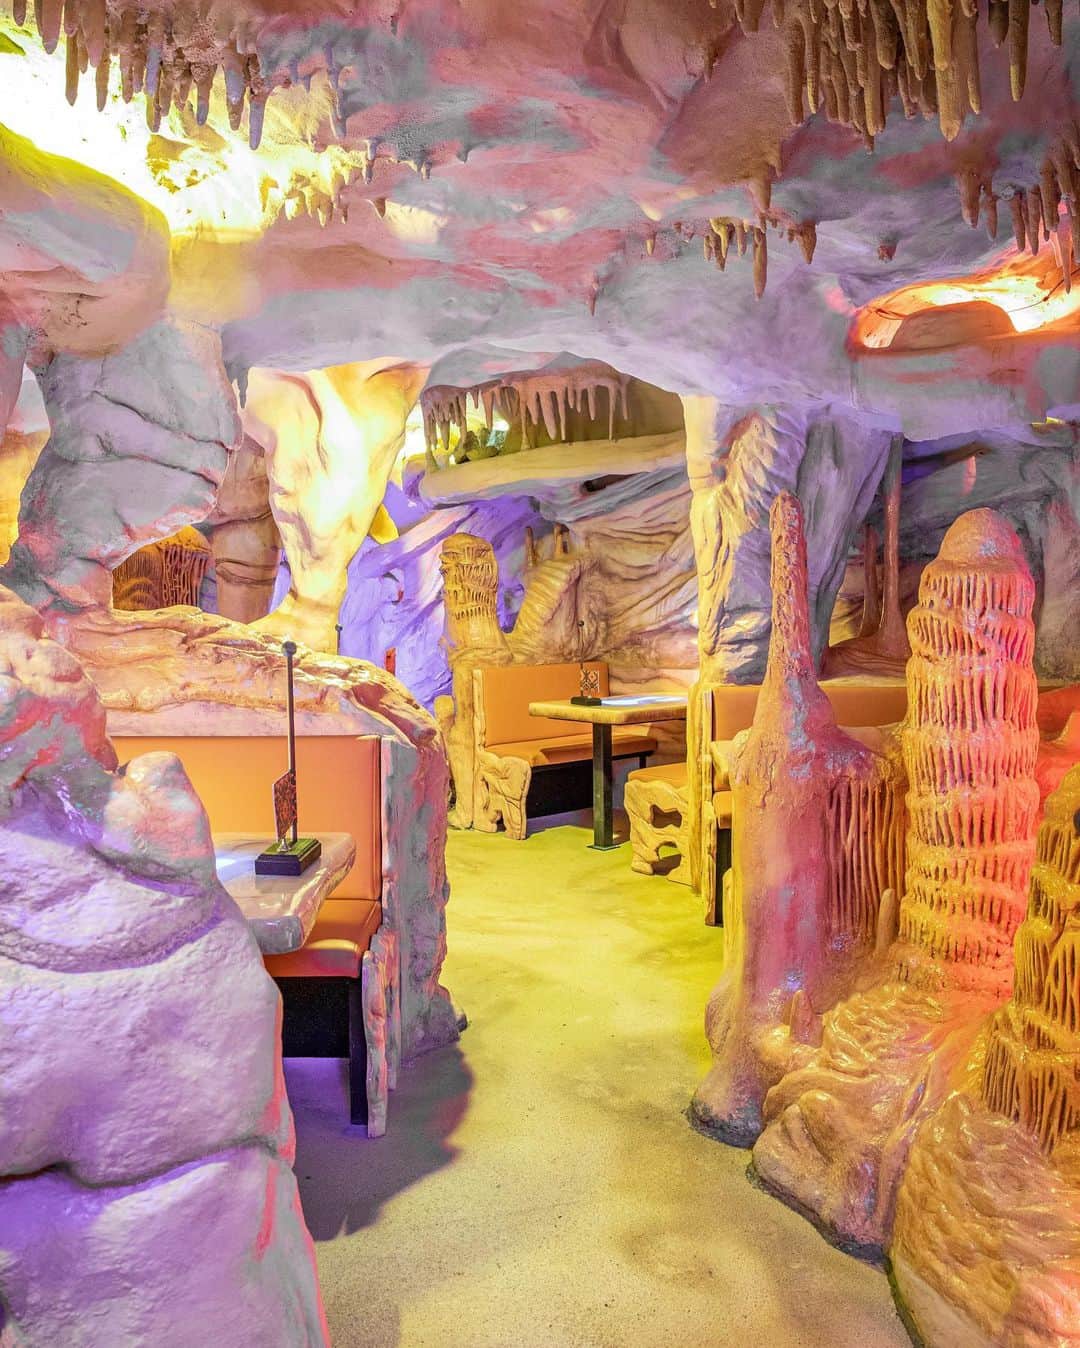 ニューヨーク・タイムズさんのインスタグラム写真 - (ニューヨーク・タイムズInstagram)「Casa Bonita, a beloved, and mocked, 56,000-square-foot Mexican restaurant in Colorado, went bankrupt during the pandemic. But now it has been rescued by the creators of “South Park,” Trey Parker and Matt Stone.  The duo spent $40 million to tear it down, to rebuild it and, they joke, to keep everything the same, except now sanitary. There is the refurbished cavern room, one of many themed dining areas. Cliff divers now practice their routines in a safer, much-improved pool area. They replicated the building’s proper shade of flamingo pink. Casa Bonita has the same 1970s vibe popular with kids, but with drastically improved food. The duo hired Dana Rodriguez, a James Beard-nominated chef, to run the kitchen, which churns out 200-gallon batches of mole daily.  Indeed, Casa Bonita, located in suburban Denver, returns as one of the biggest Mexican restaurants in the world. During the demolition phase, one cause of Casa Bonita’s subpar cuisine became clear. “There were no ovens, no range tops,” Stone said, adding “They steamed everything.” Local fans of Casa Bonita speak of the reopening as if the beloved “Orange Crush” Denver Broncos of 1977 had been revived from a cryogenic state. More than 100,000 potential customers have signed up on the restaurant’s website to make a reservation, Stone said.  Tap the link in our bio to read more about this fabled restaurant and what Parker and Stone have done to reclaim its former glory. Photos by @davidwilliamsphoto」6月10日 7時59分 - nytimes